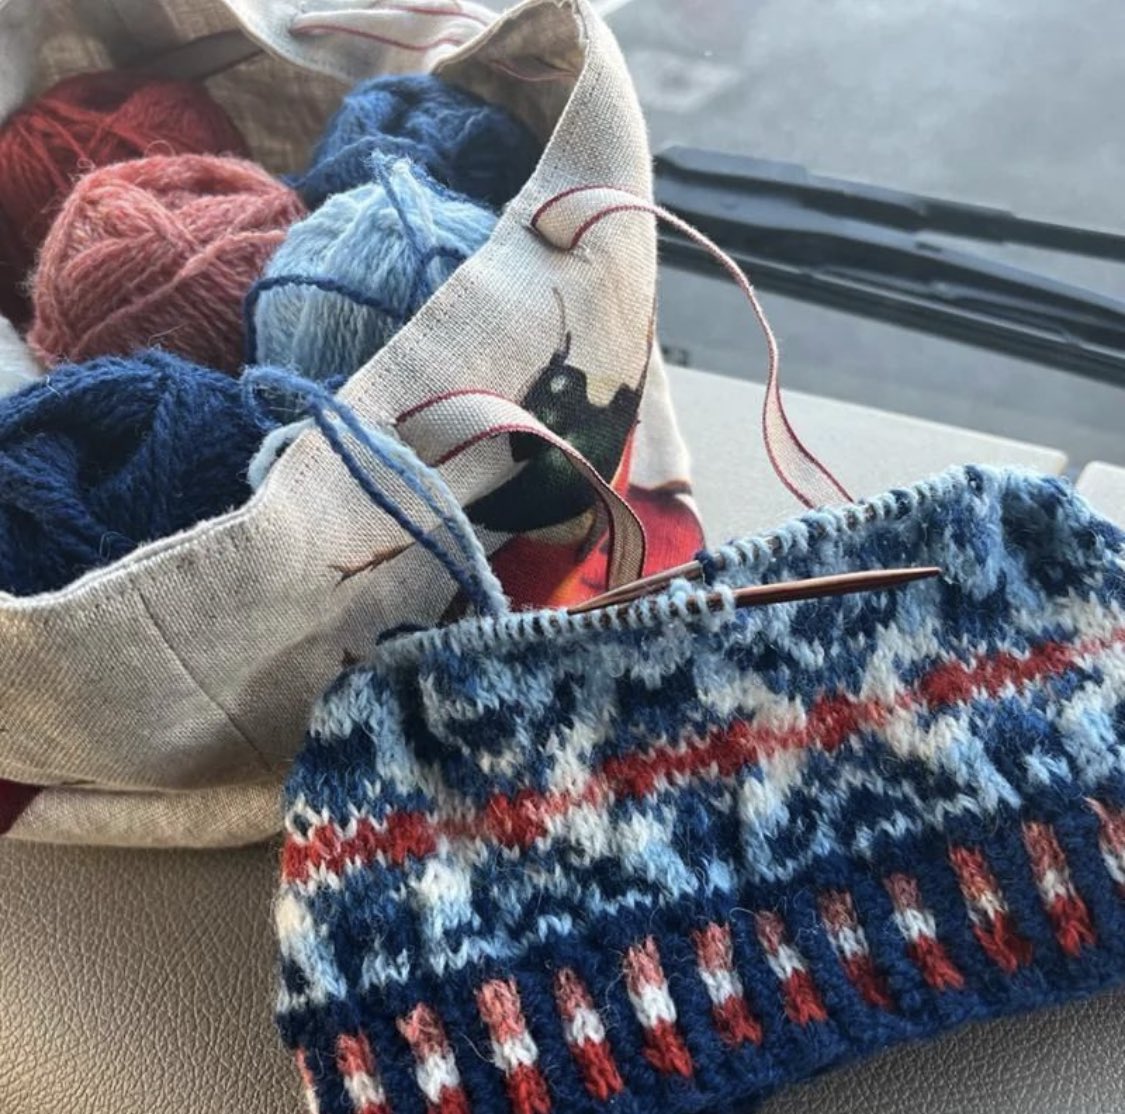 The latest news from our Knitter On The Road, roving reporter. Spindrift knits beautiful Fair Isle, and hats are the perfect thing to knit while you wait to be loaded/unloaded. #FairIsleFriday #PlacesYouCanKnit #KnitterOnTheRoad